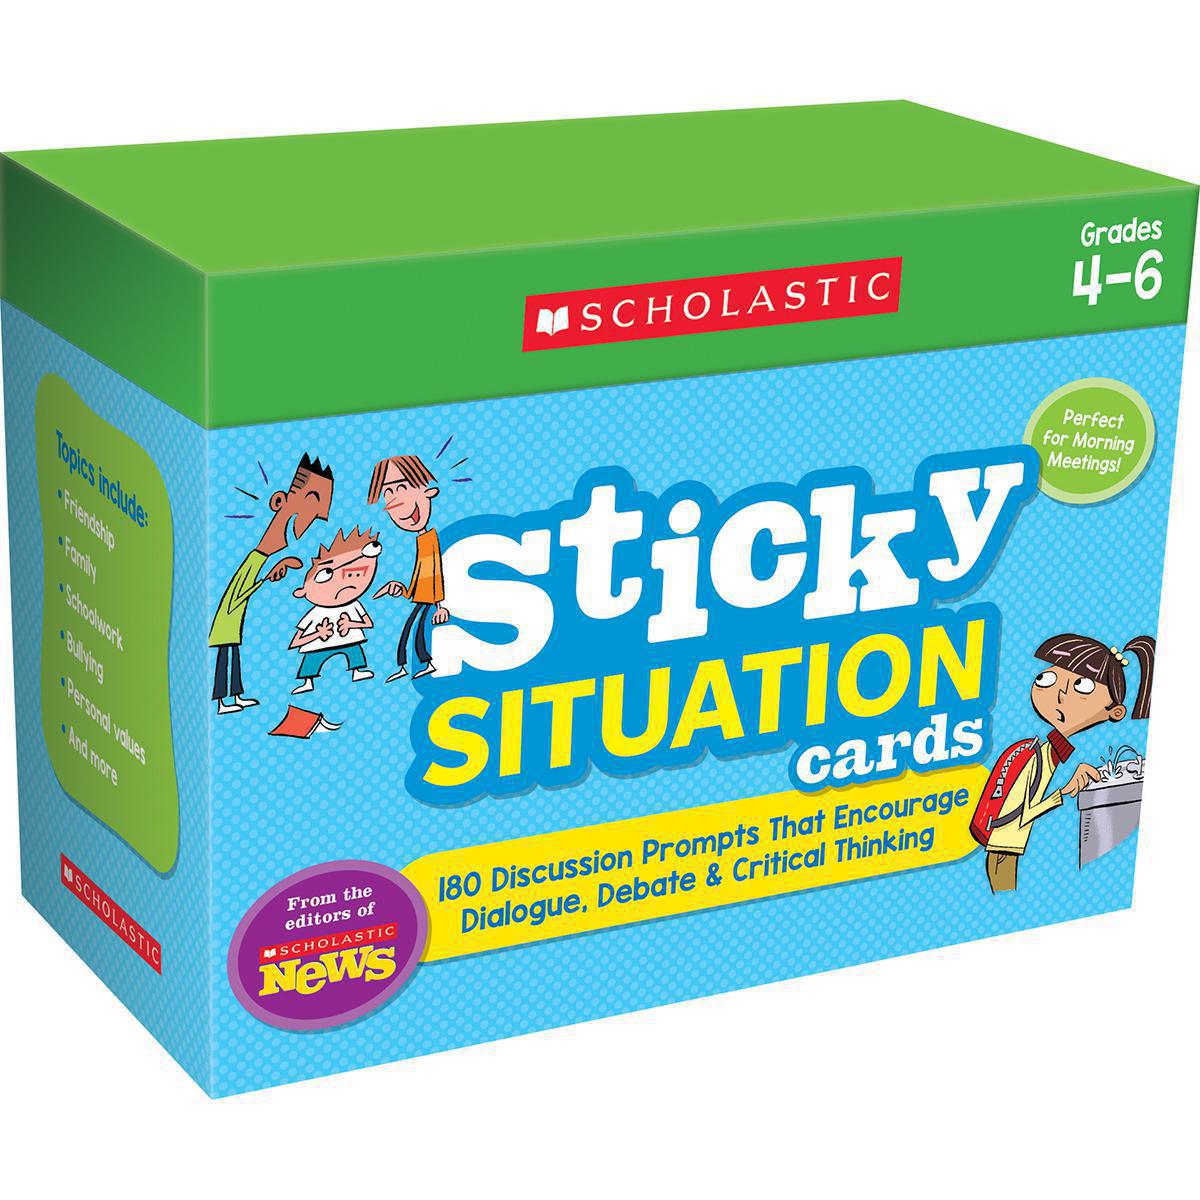  Scholastic News Sticky Situation Cards: Grades 4-6 180 Discussion Prompts That Encourage Dialogue, Debate &amp; Critical Thinking 